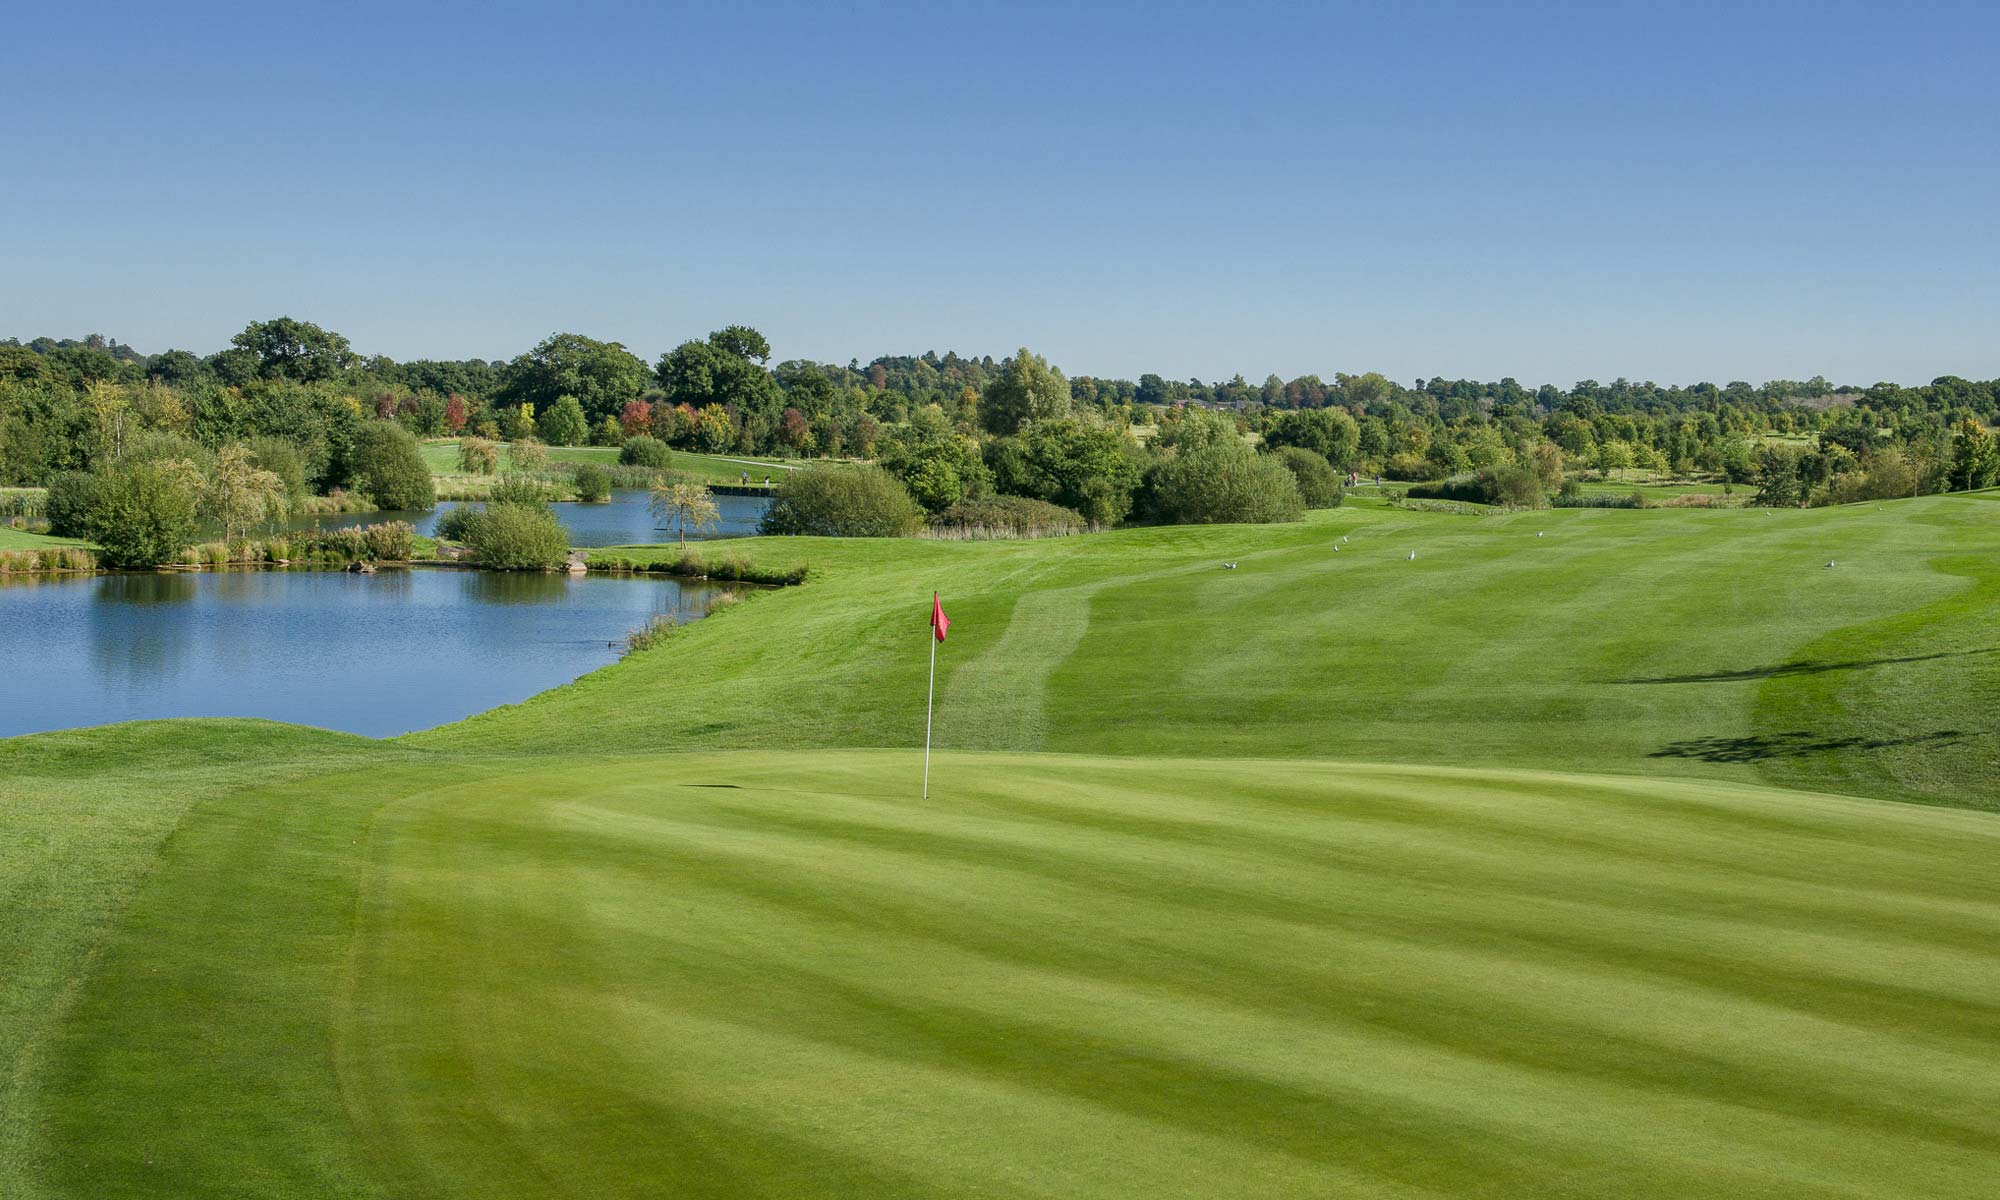 18 hole golf course at The Shire London